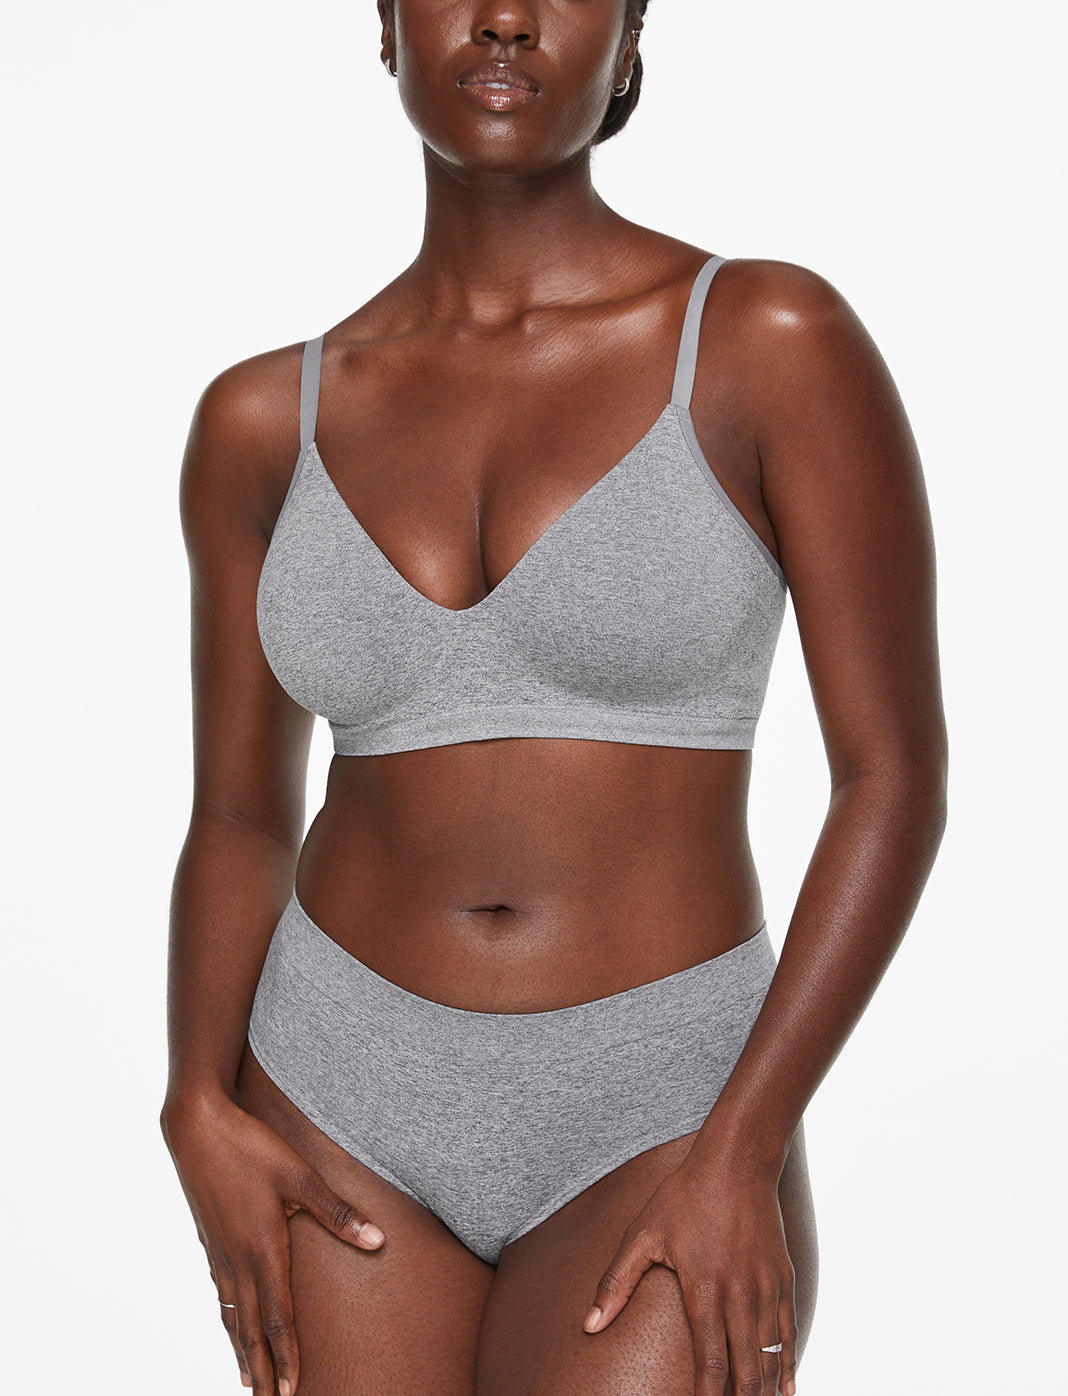 NECHOLOGY True And Co Bras For Women Women's Wireless Bra with Cooling,  Seamless Smooth Comfort Wirefree T-Shirt Bra Grey 4X-Large